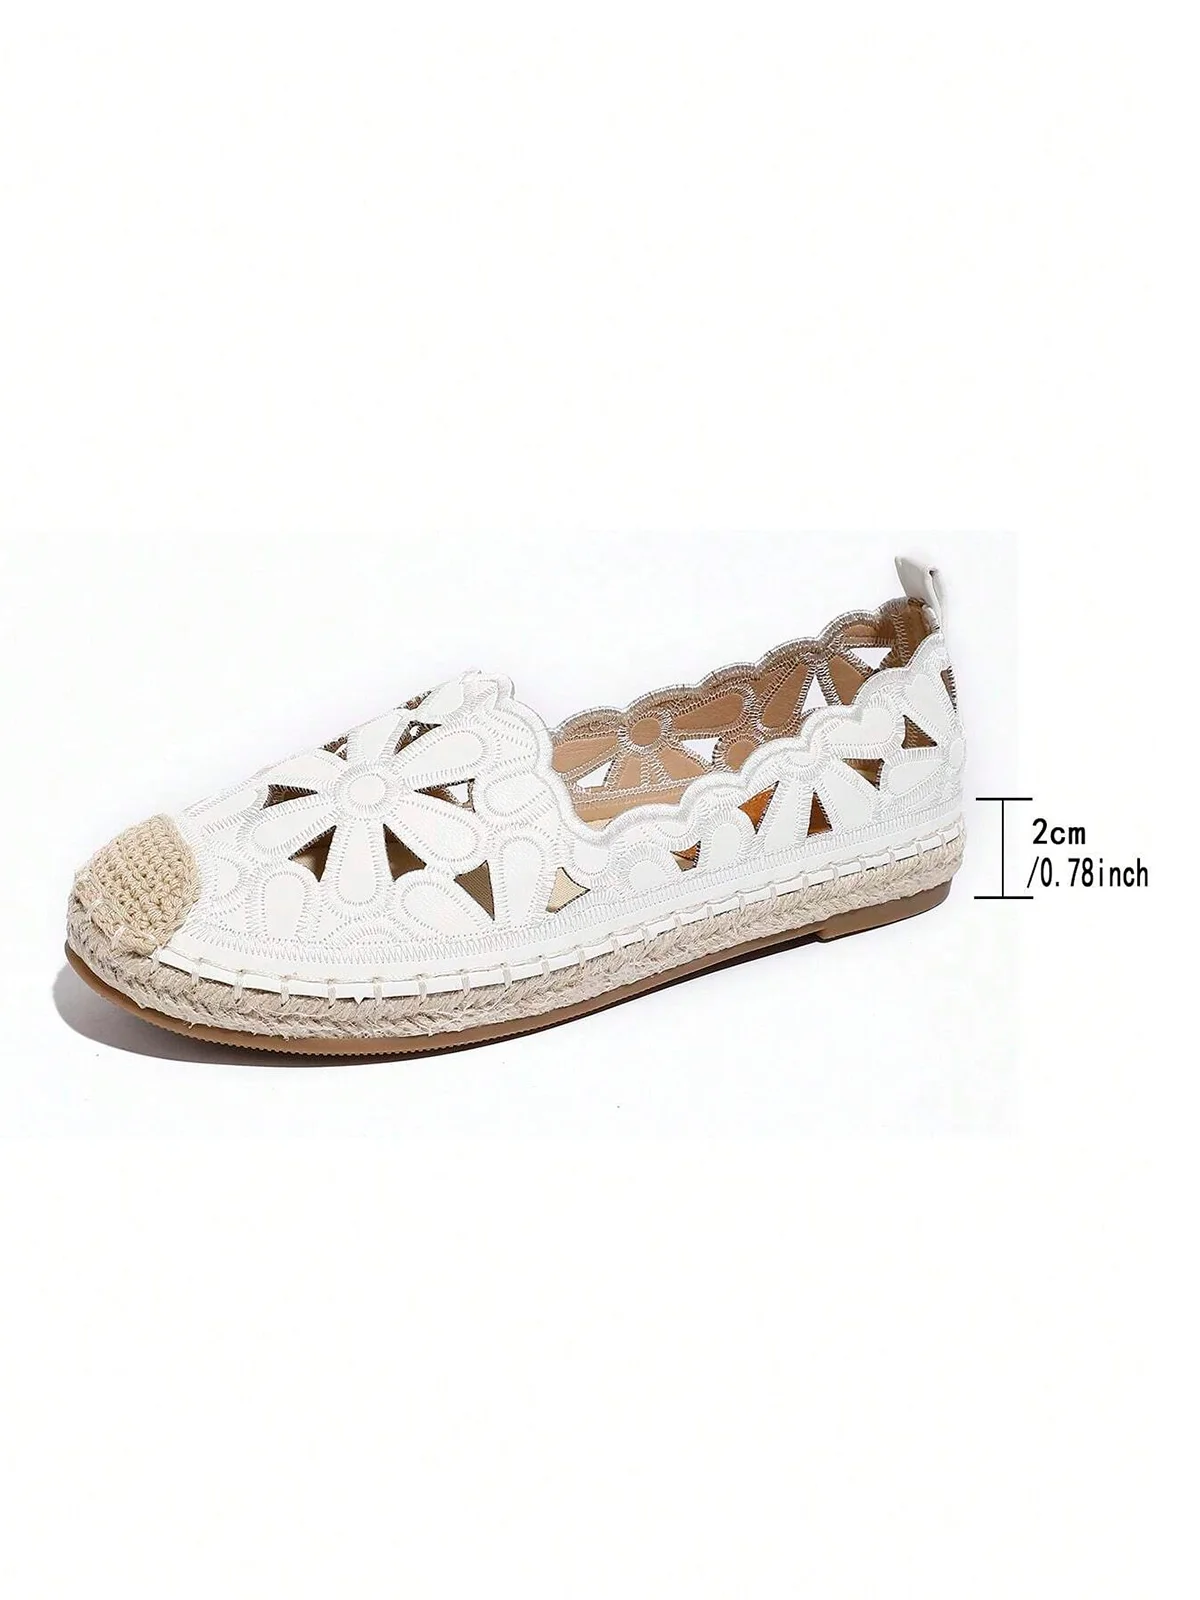 Floral Embroidery,Hollow Out Espadrille Flat Shoes